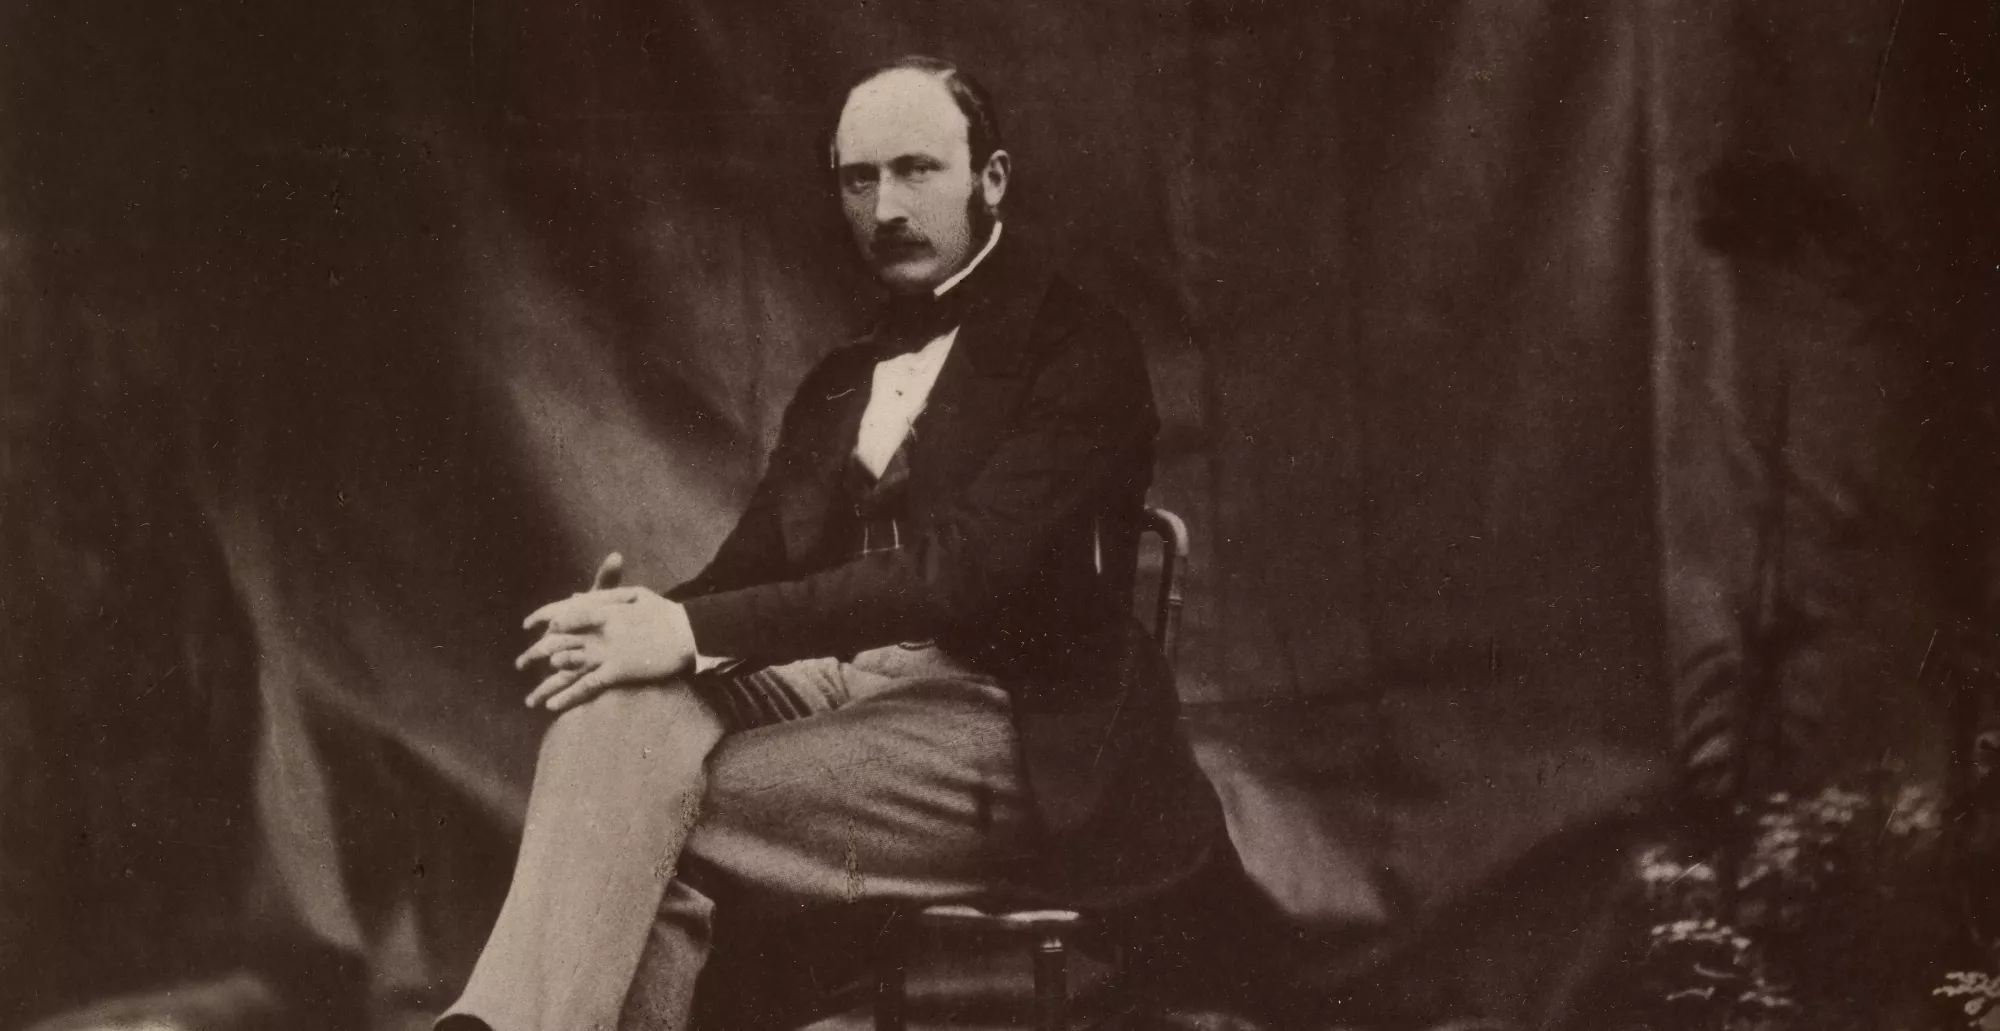 Portrait photograph of Prince Albert seated on a chair